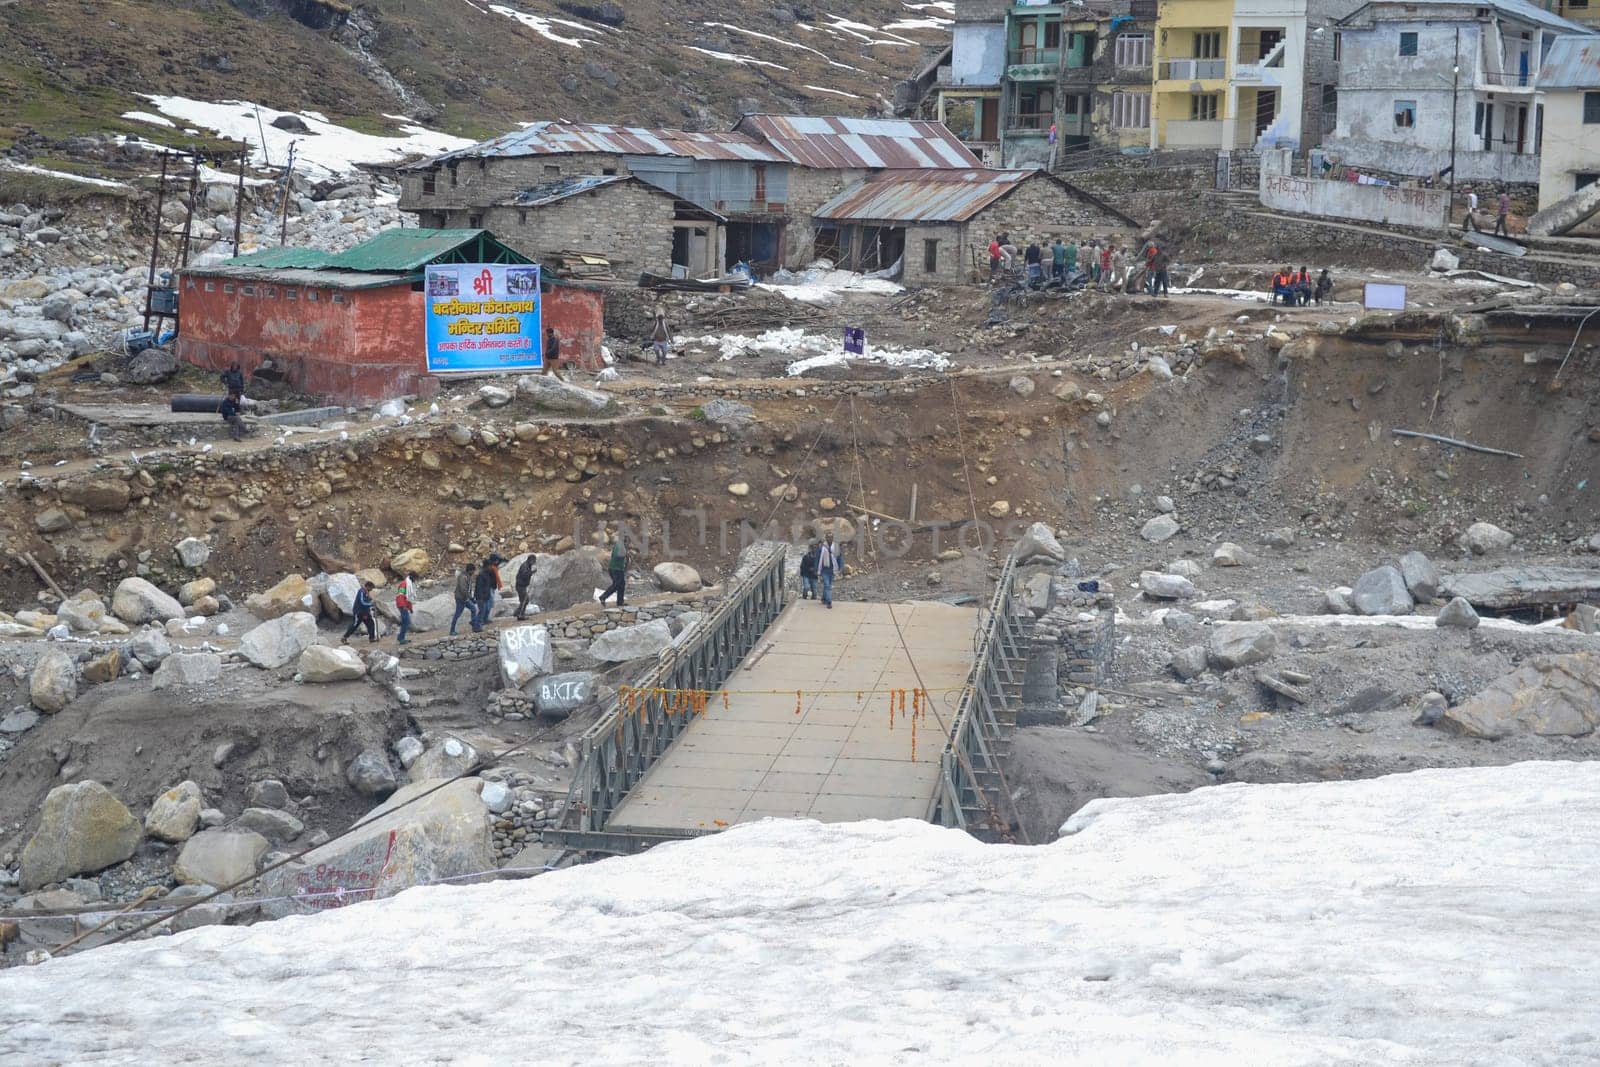 Under construction bridge that collapsed in kedarnath disaster. There is a reconstruction plan for the Kedarnath temple area that was damaged and significantly washed away in floods of 2013.